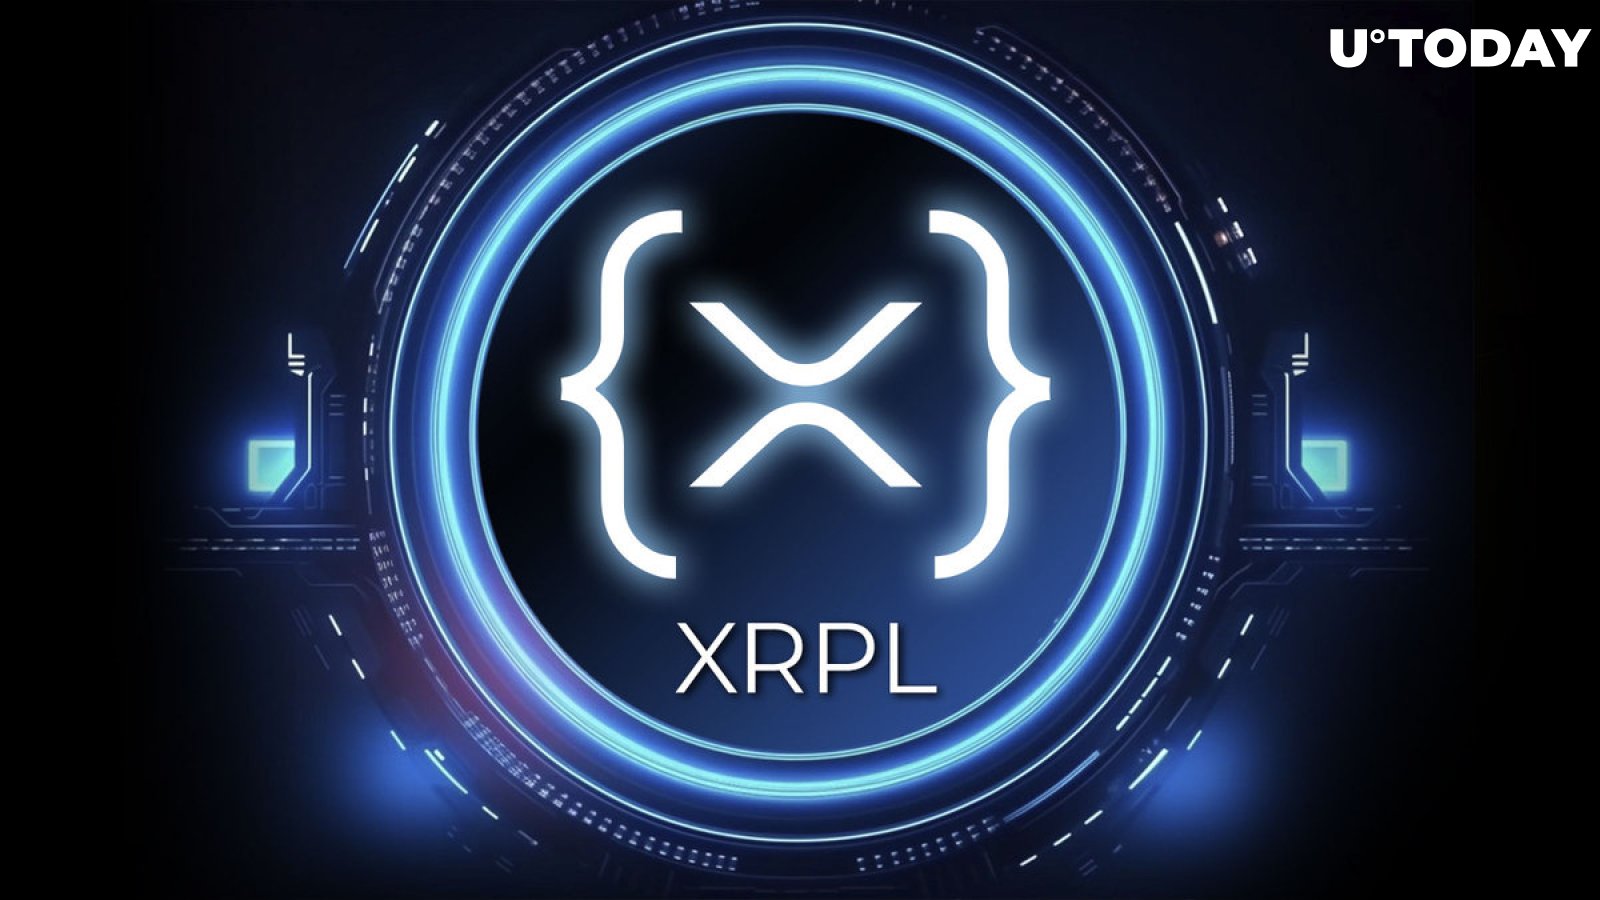 XRP Ledger Sets New Standard for Lending Giant; Here's What to Know